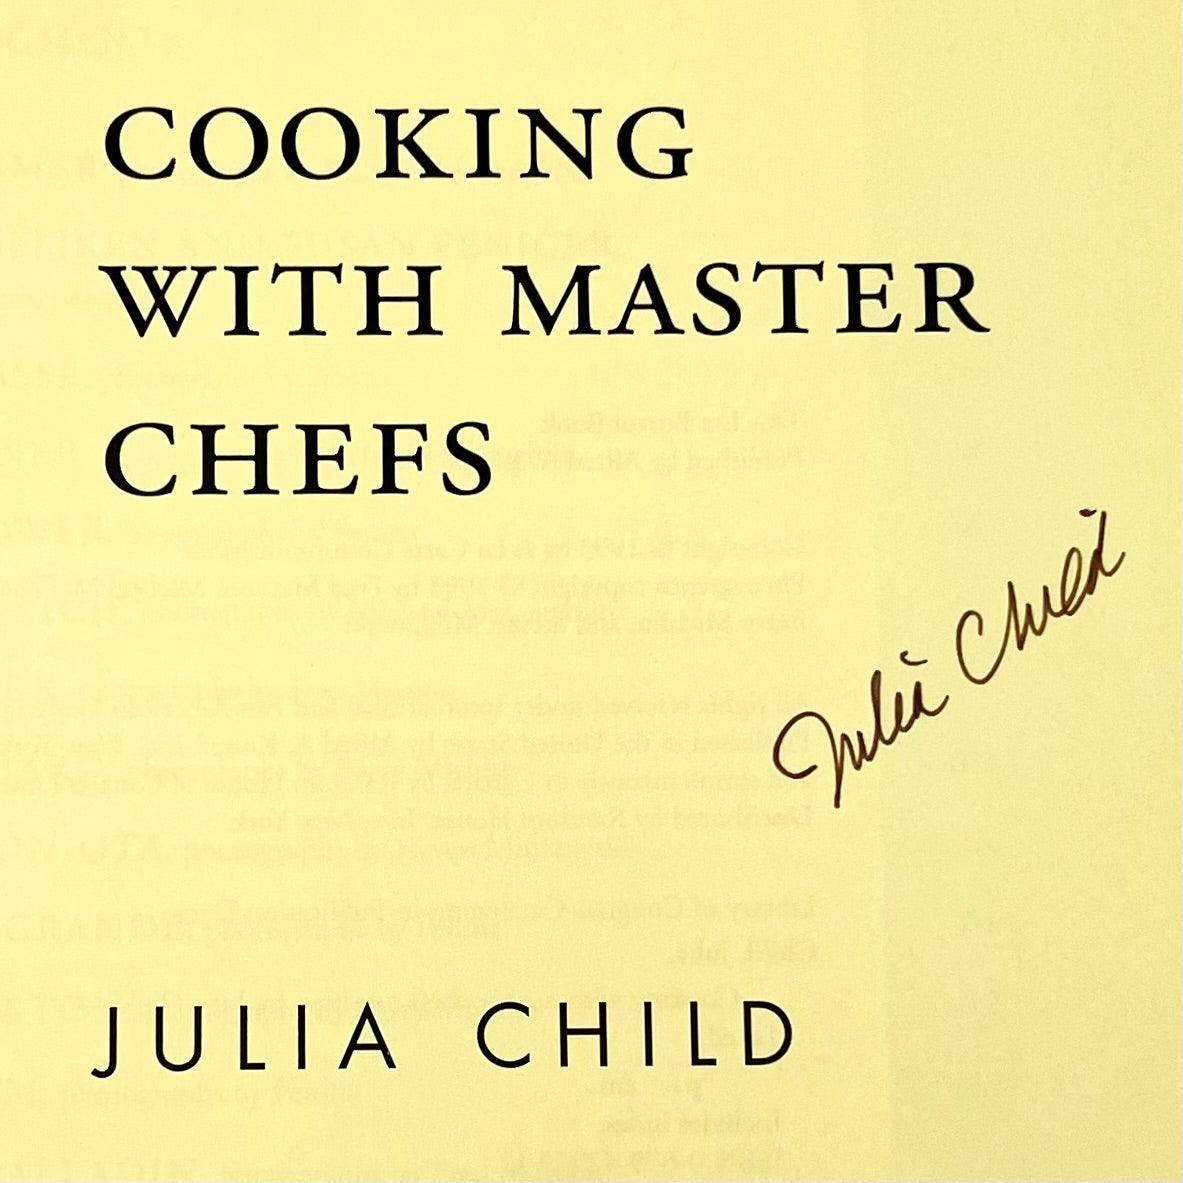 Cooking with Master Chefs (signed by Julia Child) - Grinning Cat Books - COOKING - COOKING